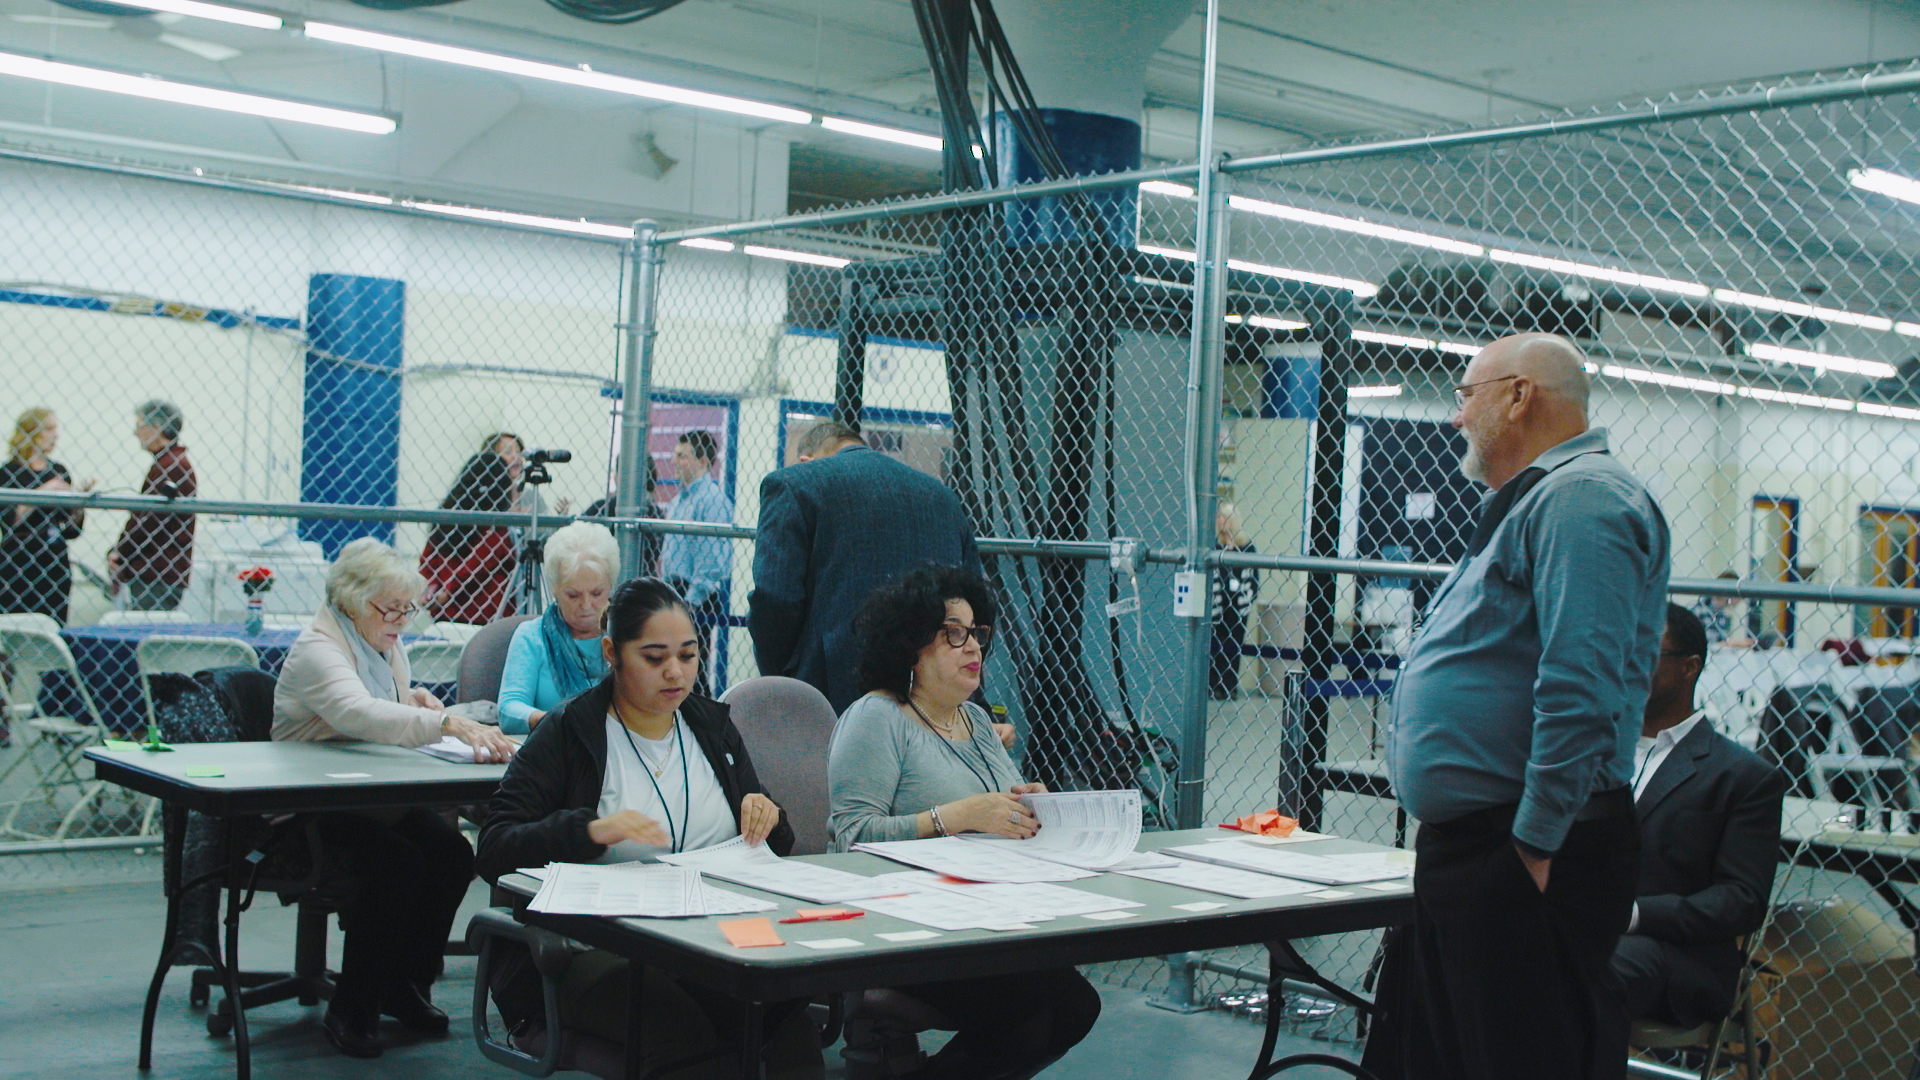 Rhode Island elections staffers count ballots as part of the state's pilot risk-limiting audit at the Board of Elections warehouse in Providence on Jan. 16. ((Sky Sabin—Sky Sabin Productions LLC))